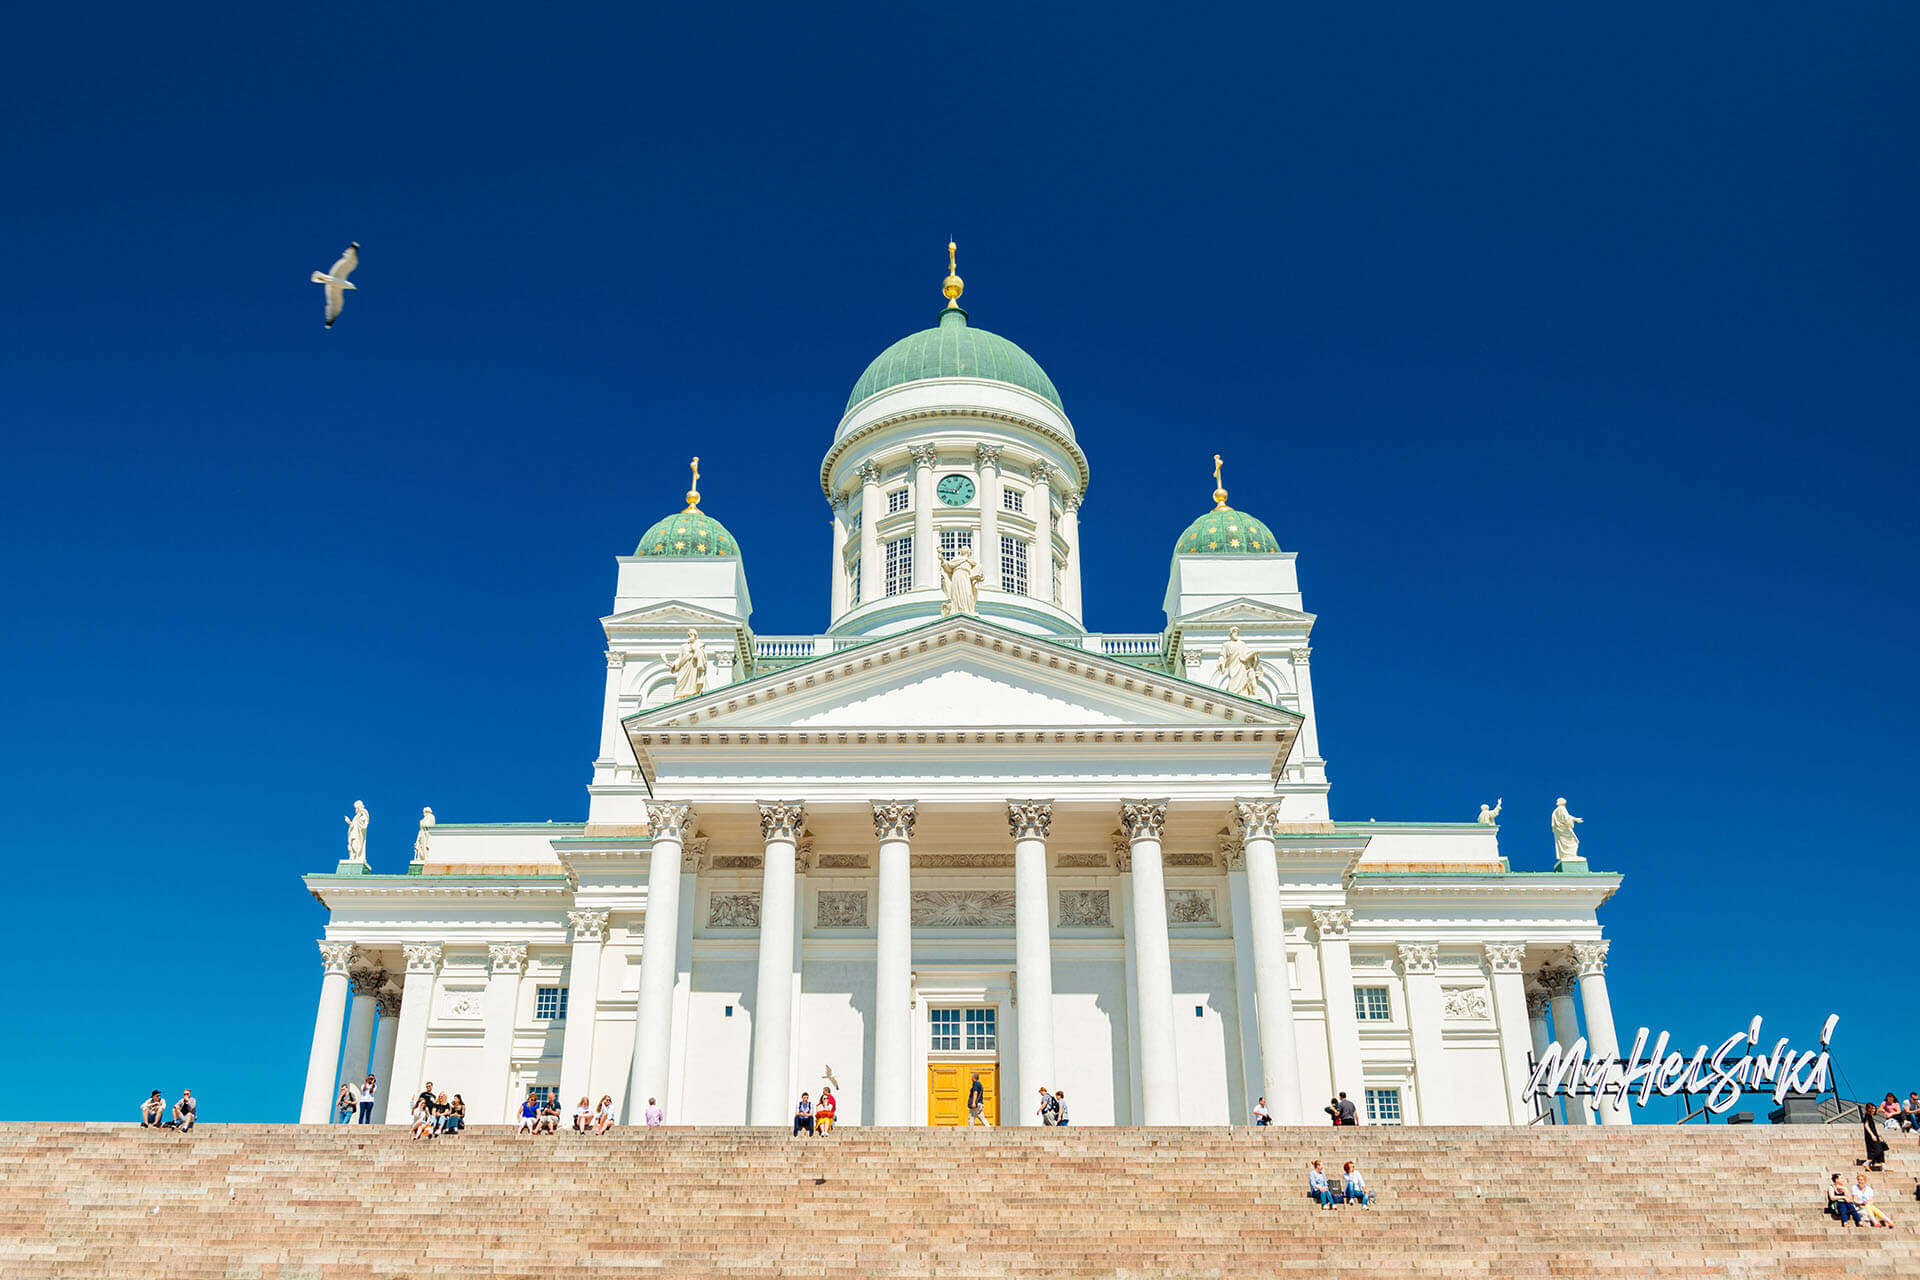 Finland: External Audit on Immigration Laws